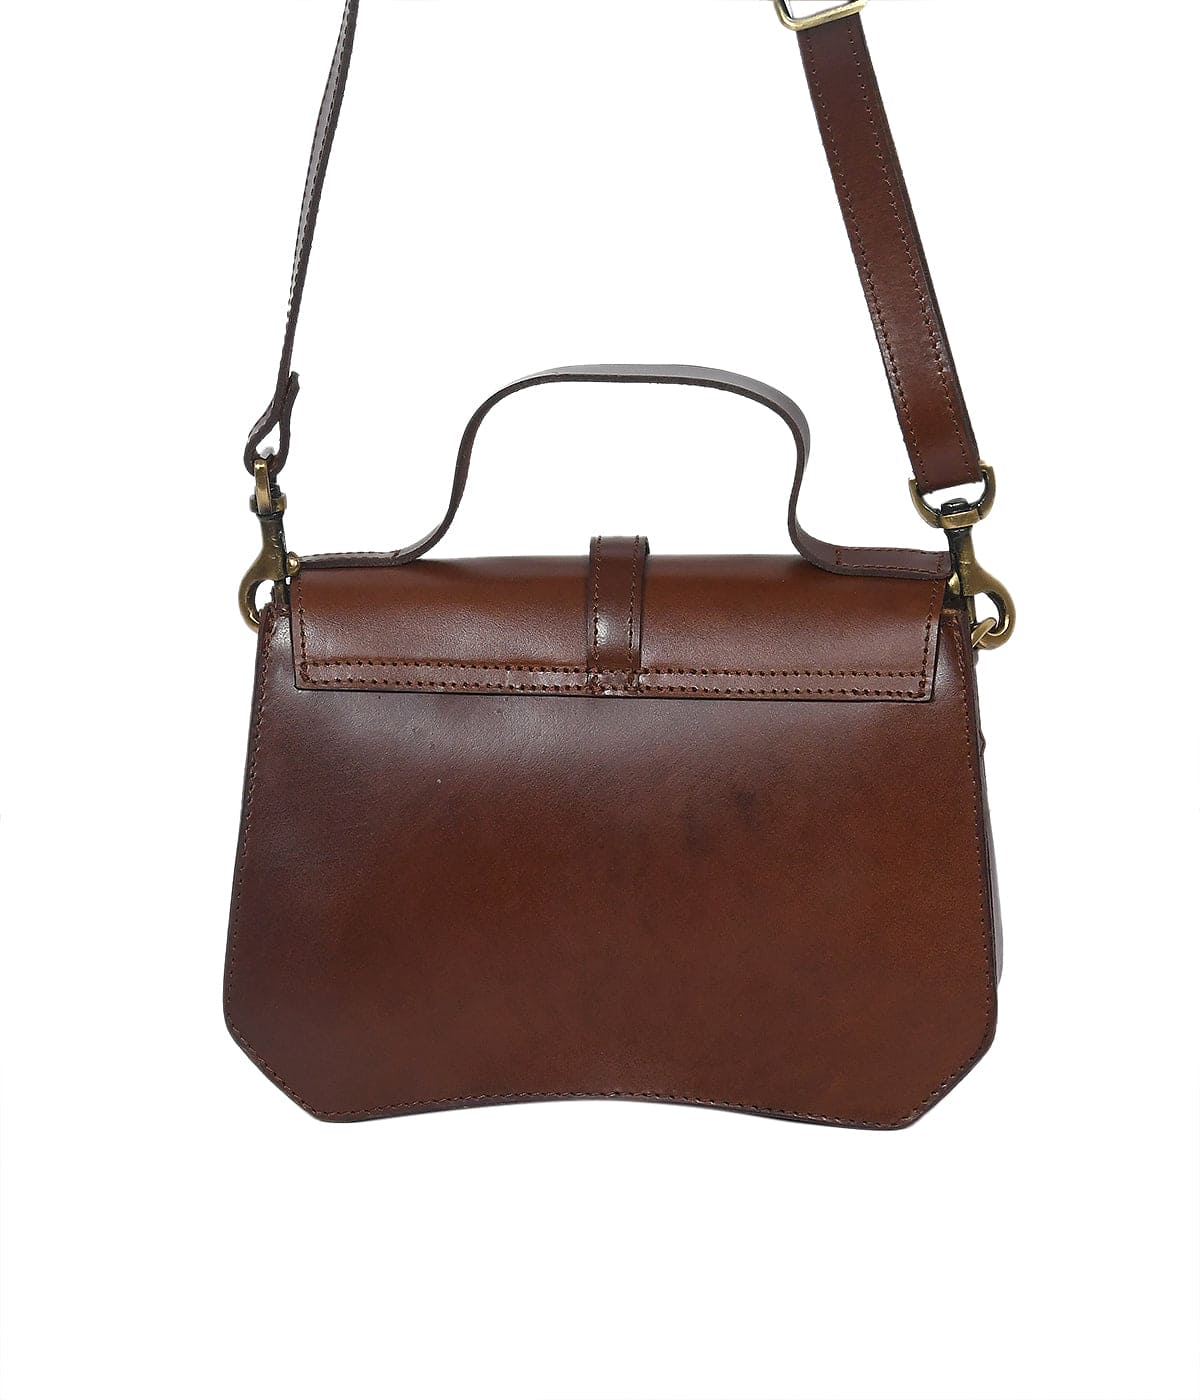 Classic Brown Leather Sling Bag - The Epitome of Style and Functionali ...